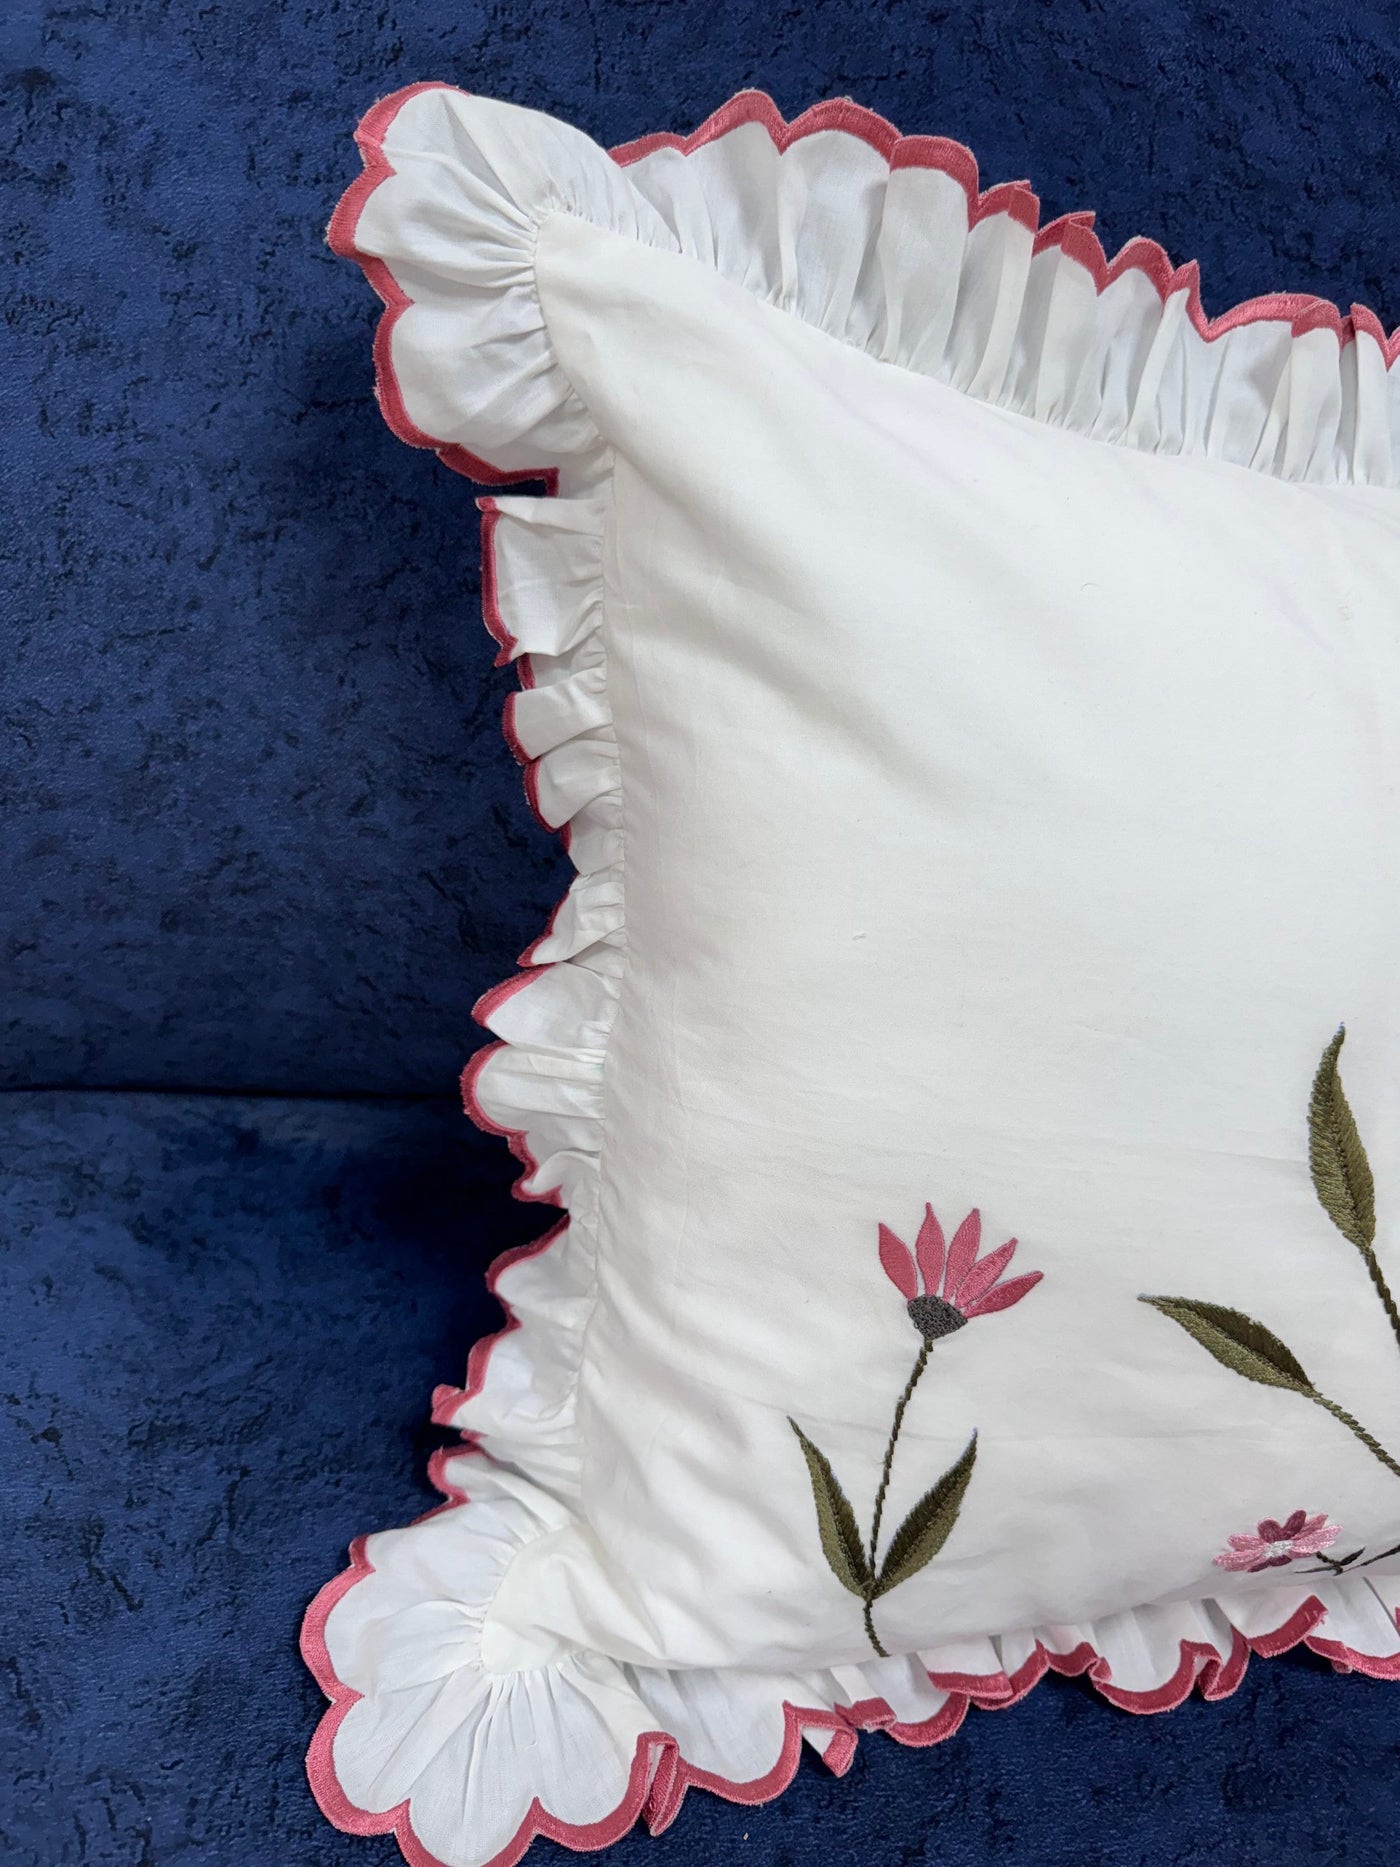 Fabricrush Pillow Cover, Pillow Case, Decorative Cushion Cover, Throw Pillows, Embroidered White Pillow Cover with Ruffles for Sofa Couch Bed Chair